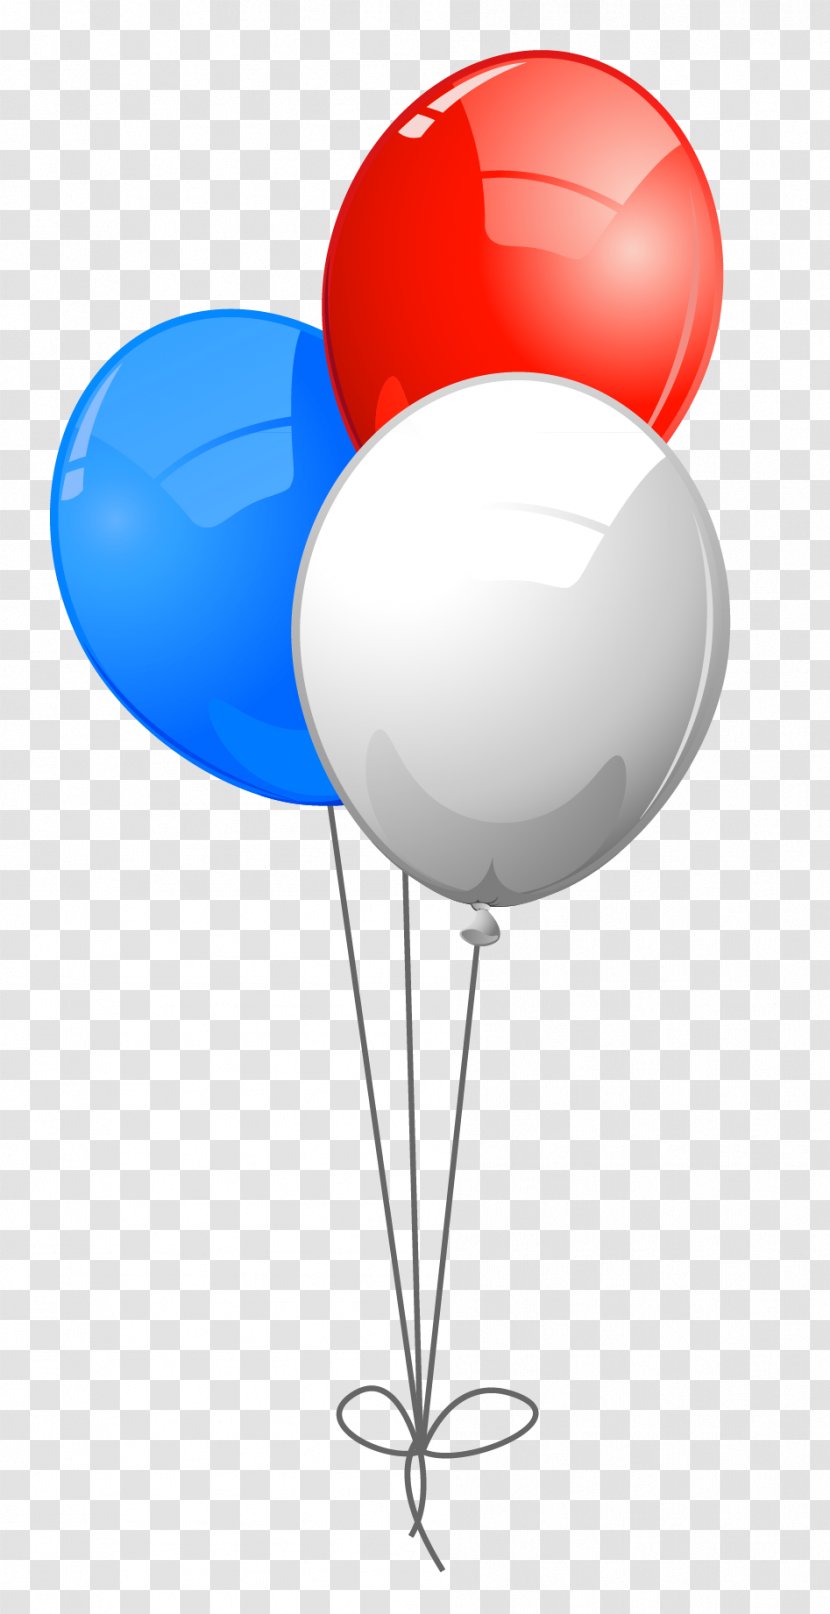 Blue Balloon Red Clip Art - Color - USA Colors Balloons Clipart Transparent PNG